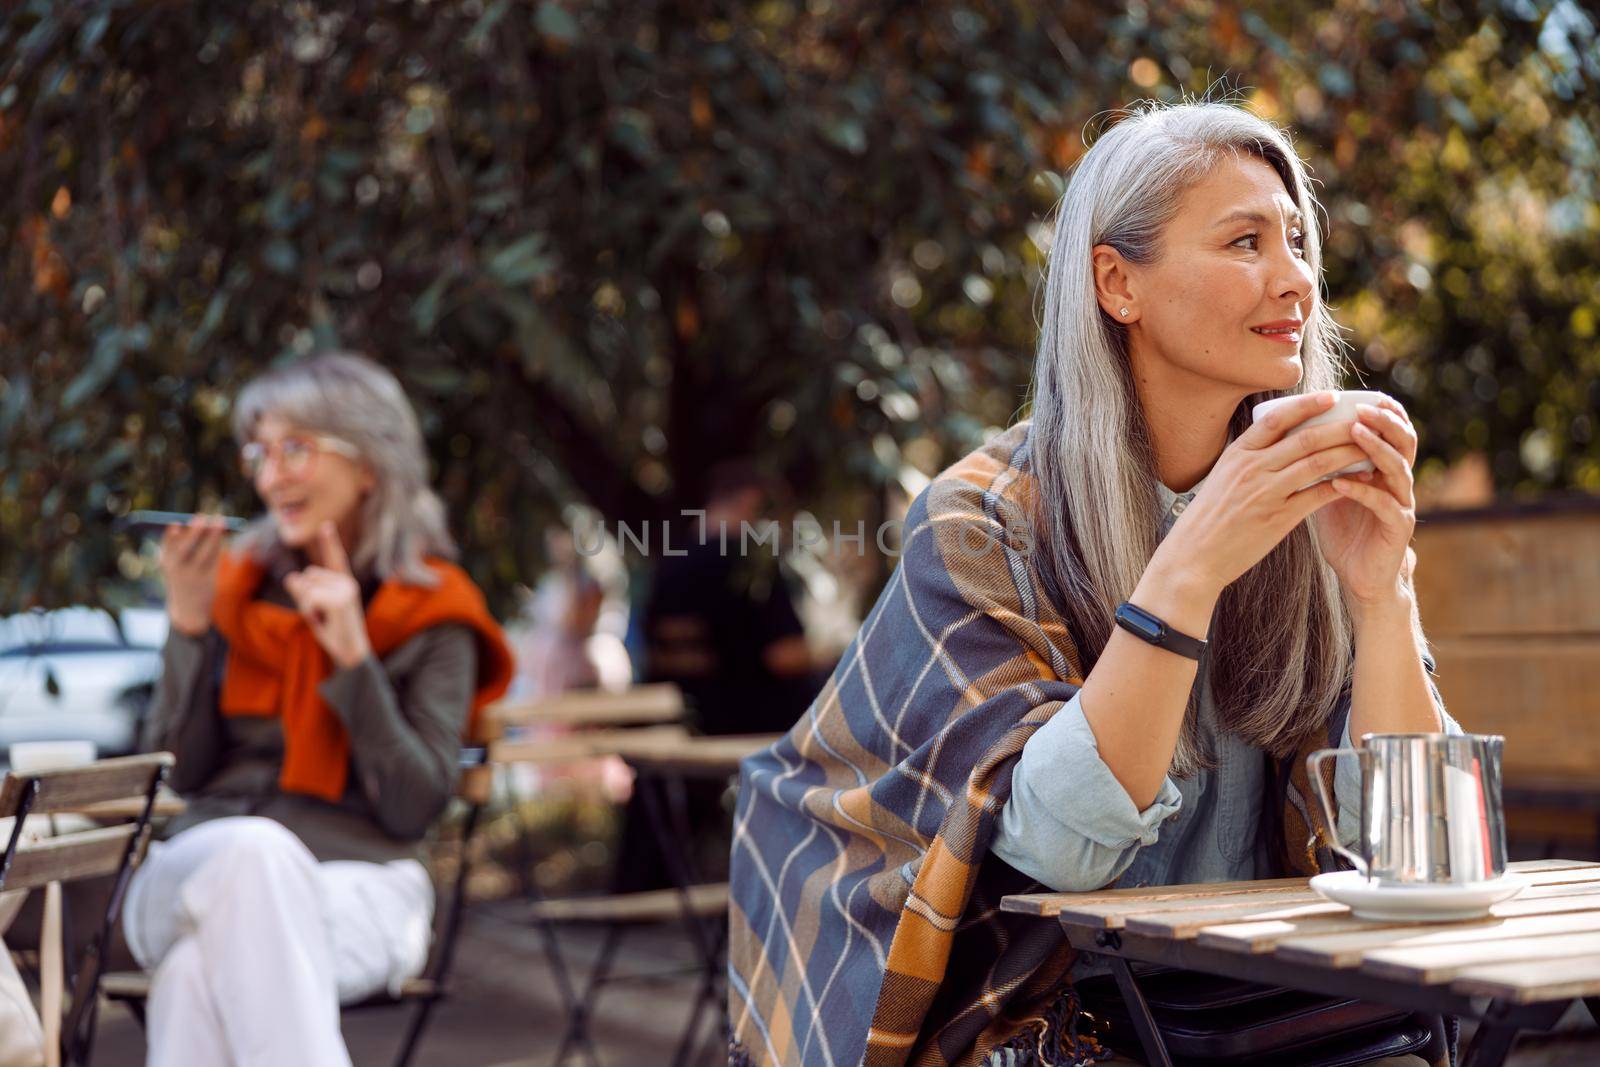 Senior cafe guests, focus on thoughtful hoary haired mature woman holding cup at table on outdoors cafe terrace on autumn day